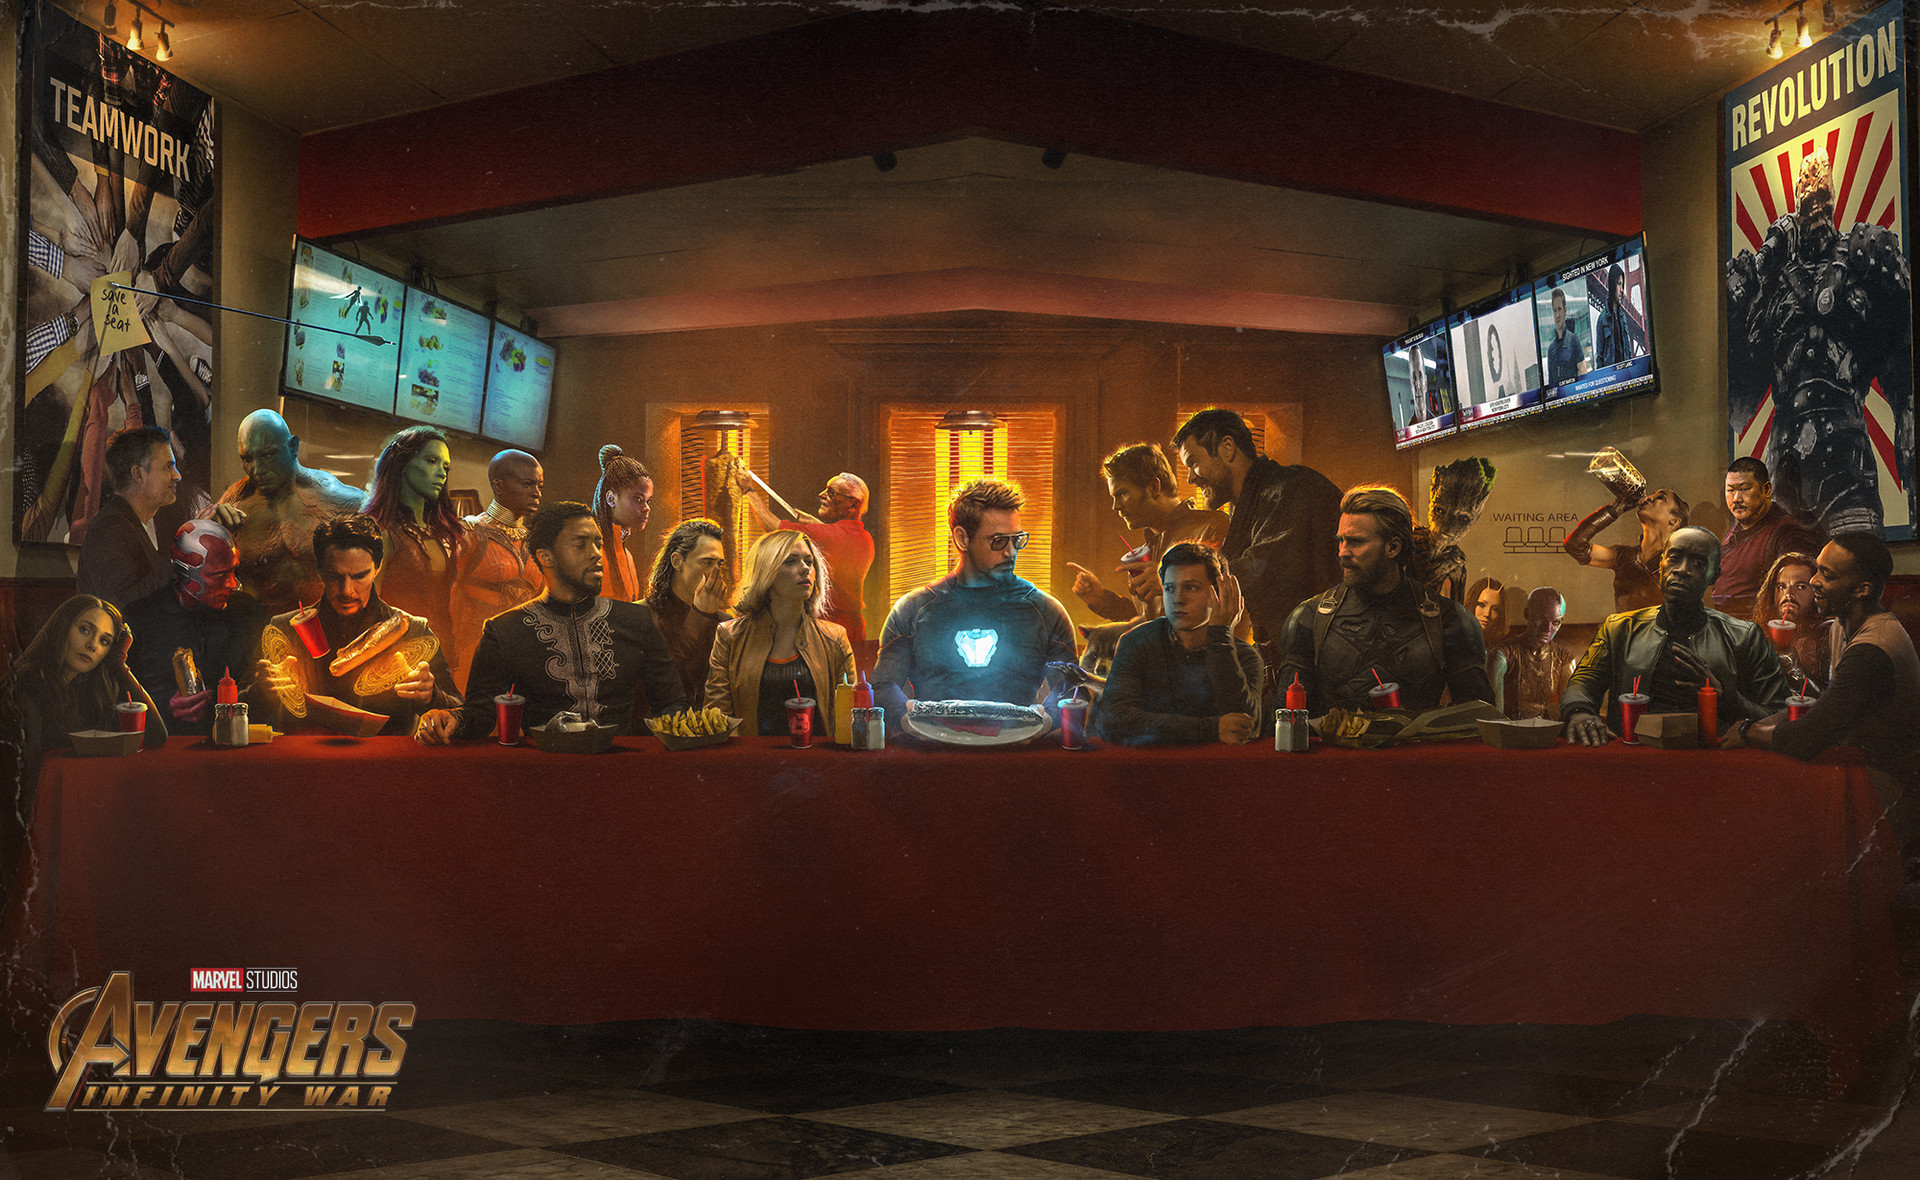 General 1920x1180 The Avengers Iron Man Black Widow Loki Black Panther Doctor Strange Drax the Destroyer Captain America Stan Lee Vision Bruce Banner Gamora  Star-Lord Thor Groot Captain America: The Winter Soldier War Machine  valkyries photoshopped Spider-Man fast food The Last Supper Avengers: Infinity war Guardians of the Galaxy Hulk Bucky Barnes Falcon Tony Stark Rocket Raccoon Ant-Man Hawkeye Marvel Cinematic Universe Marvel Comics Bosslogic Ant-Man and the Wasp Scarlet Witch parody